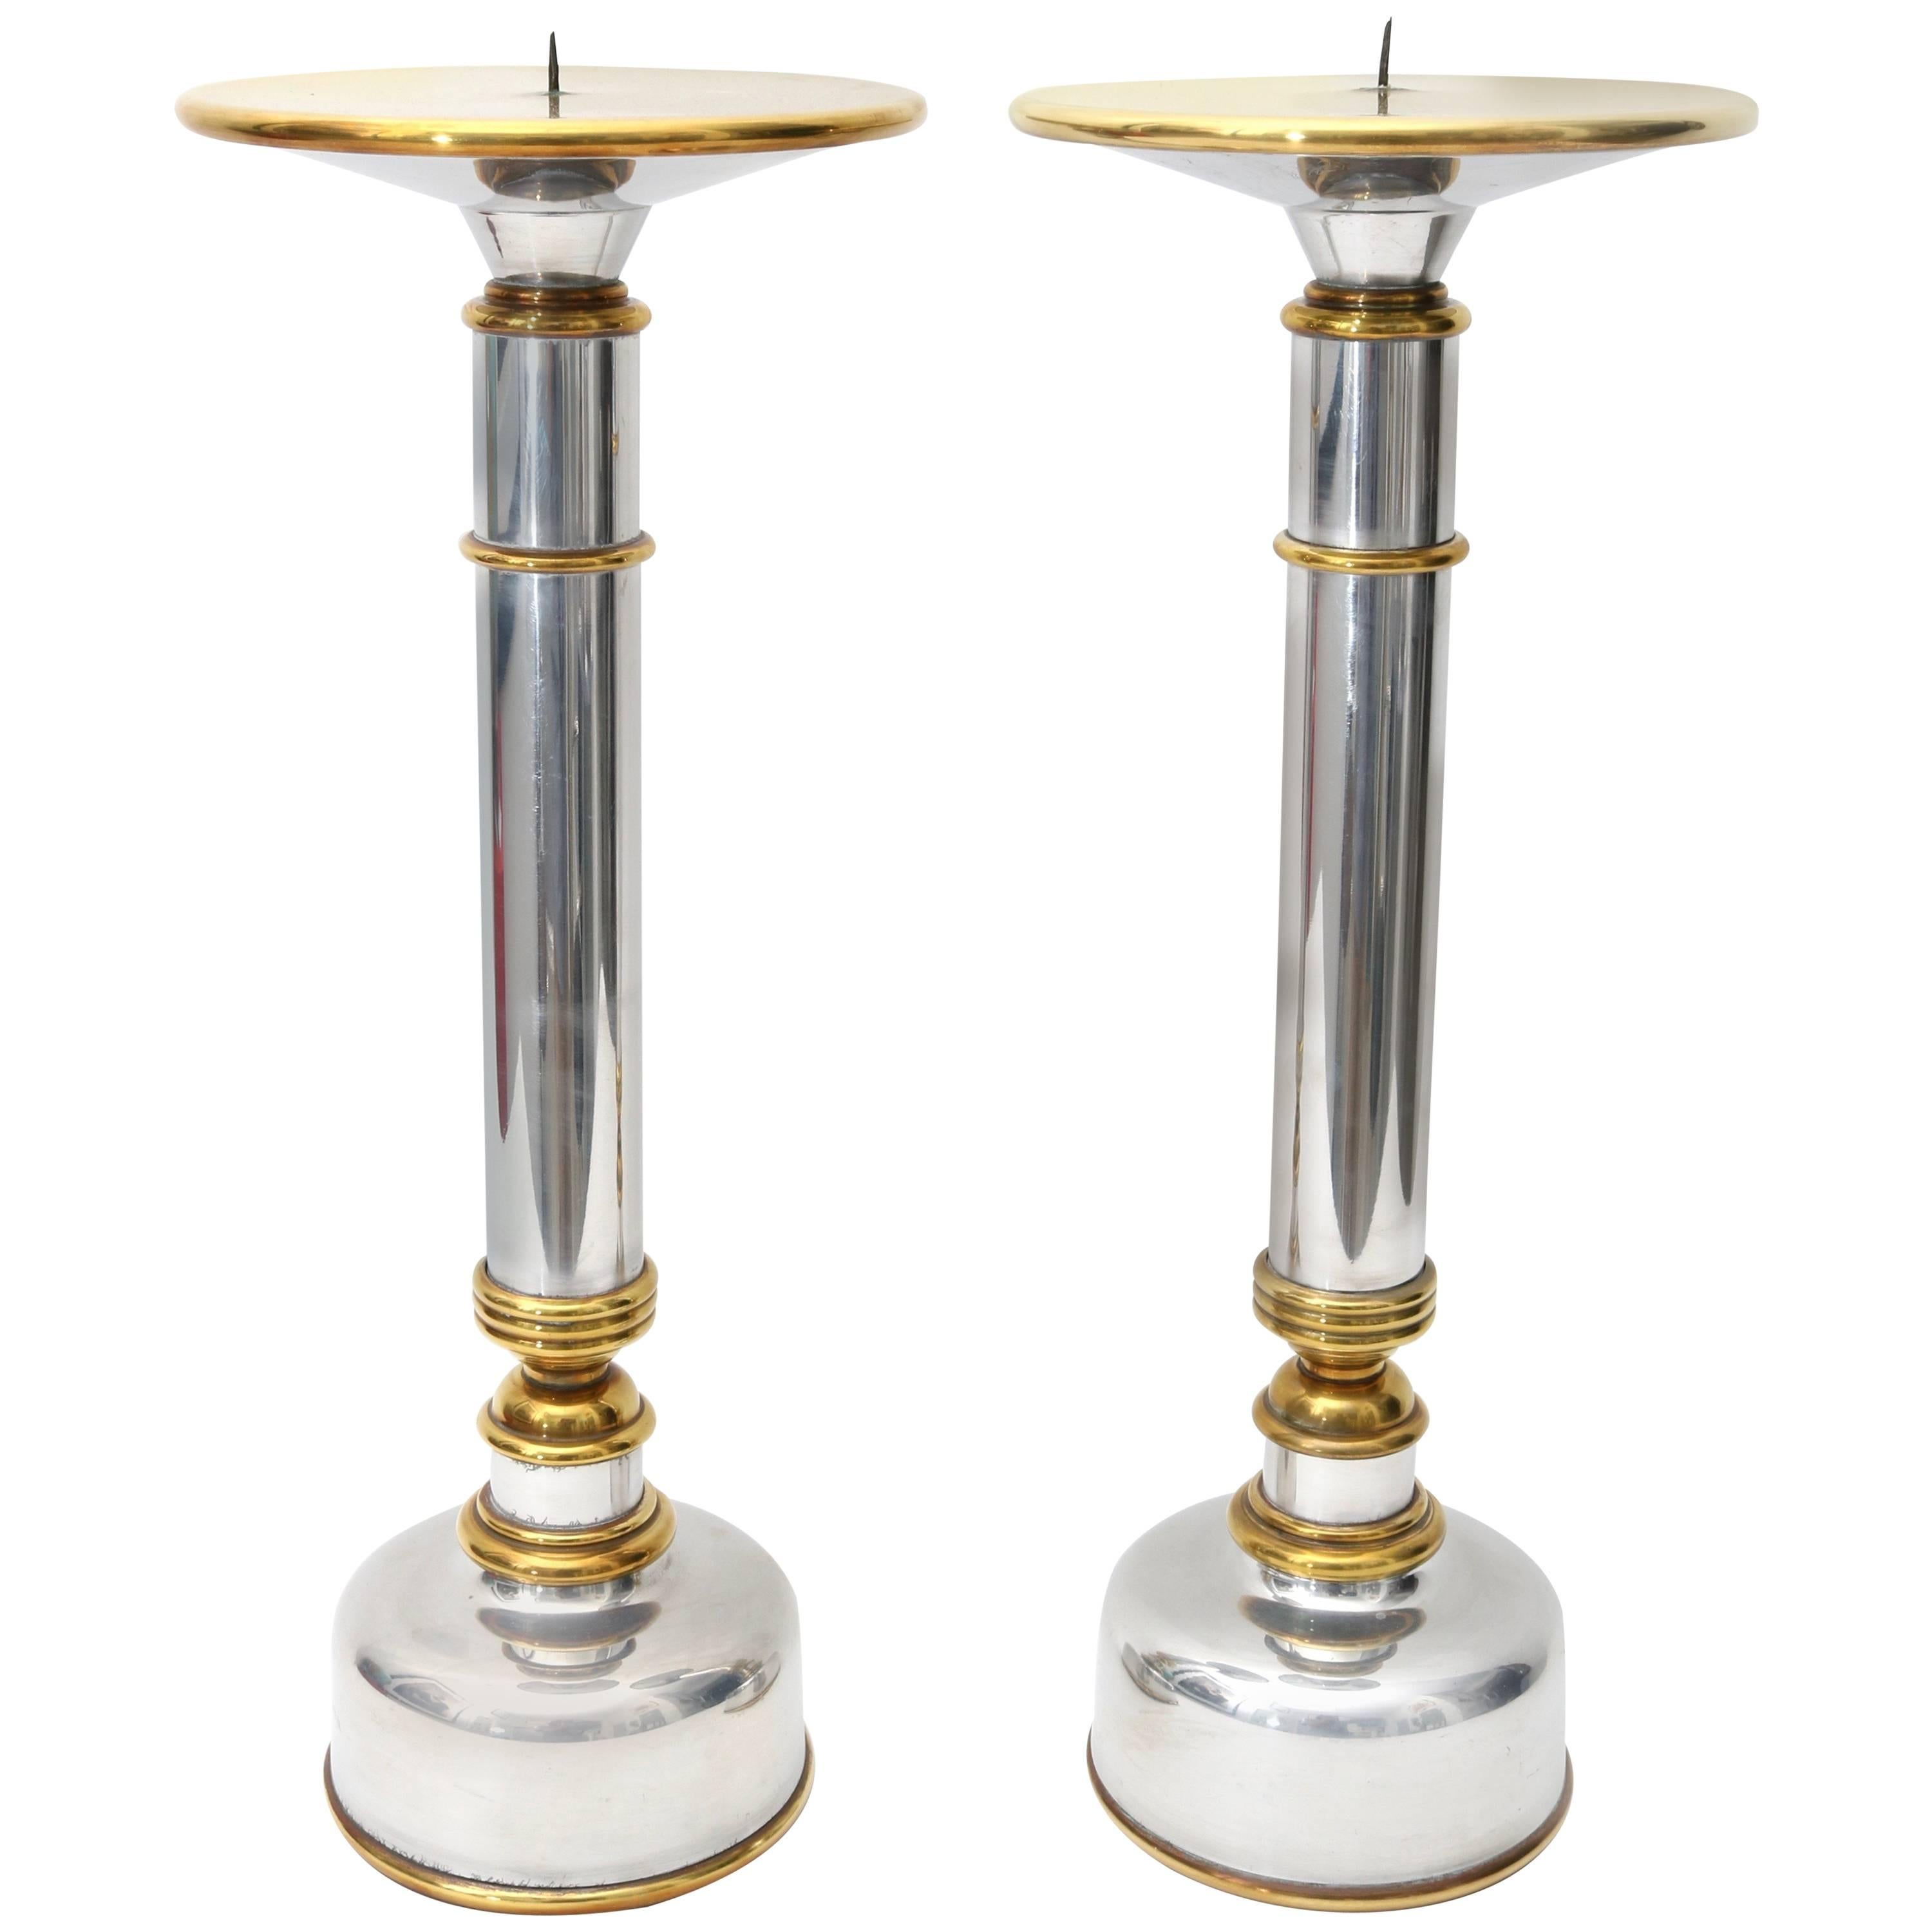 Pair of Polished Aluminium and Brass Candlesticks